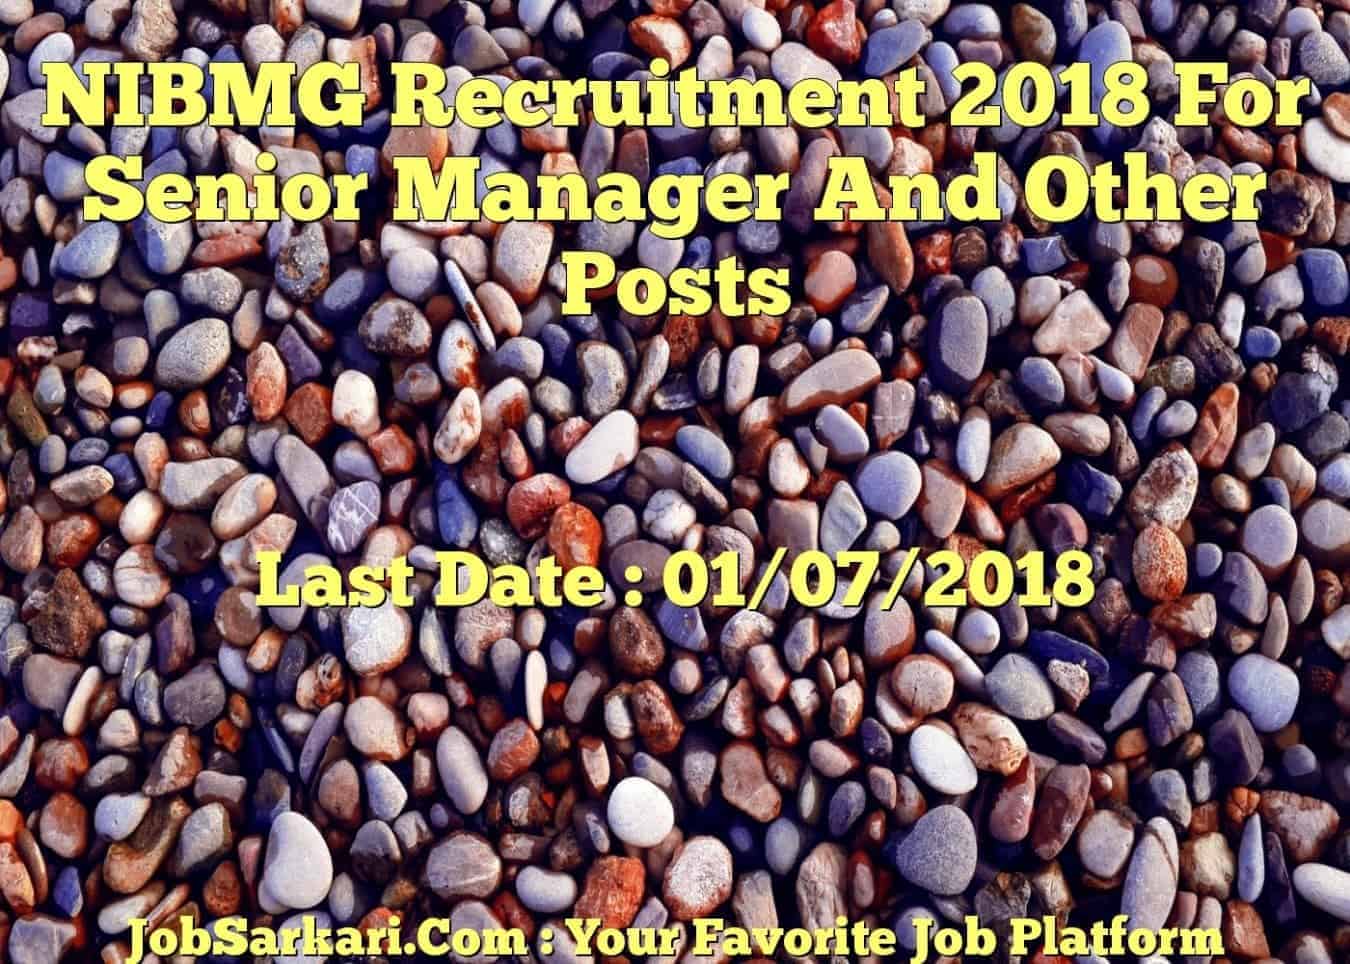 NIBMG Recruitment 2018 For Senior Manager And Other Posts